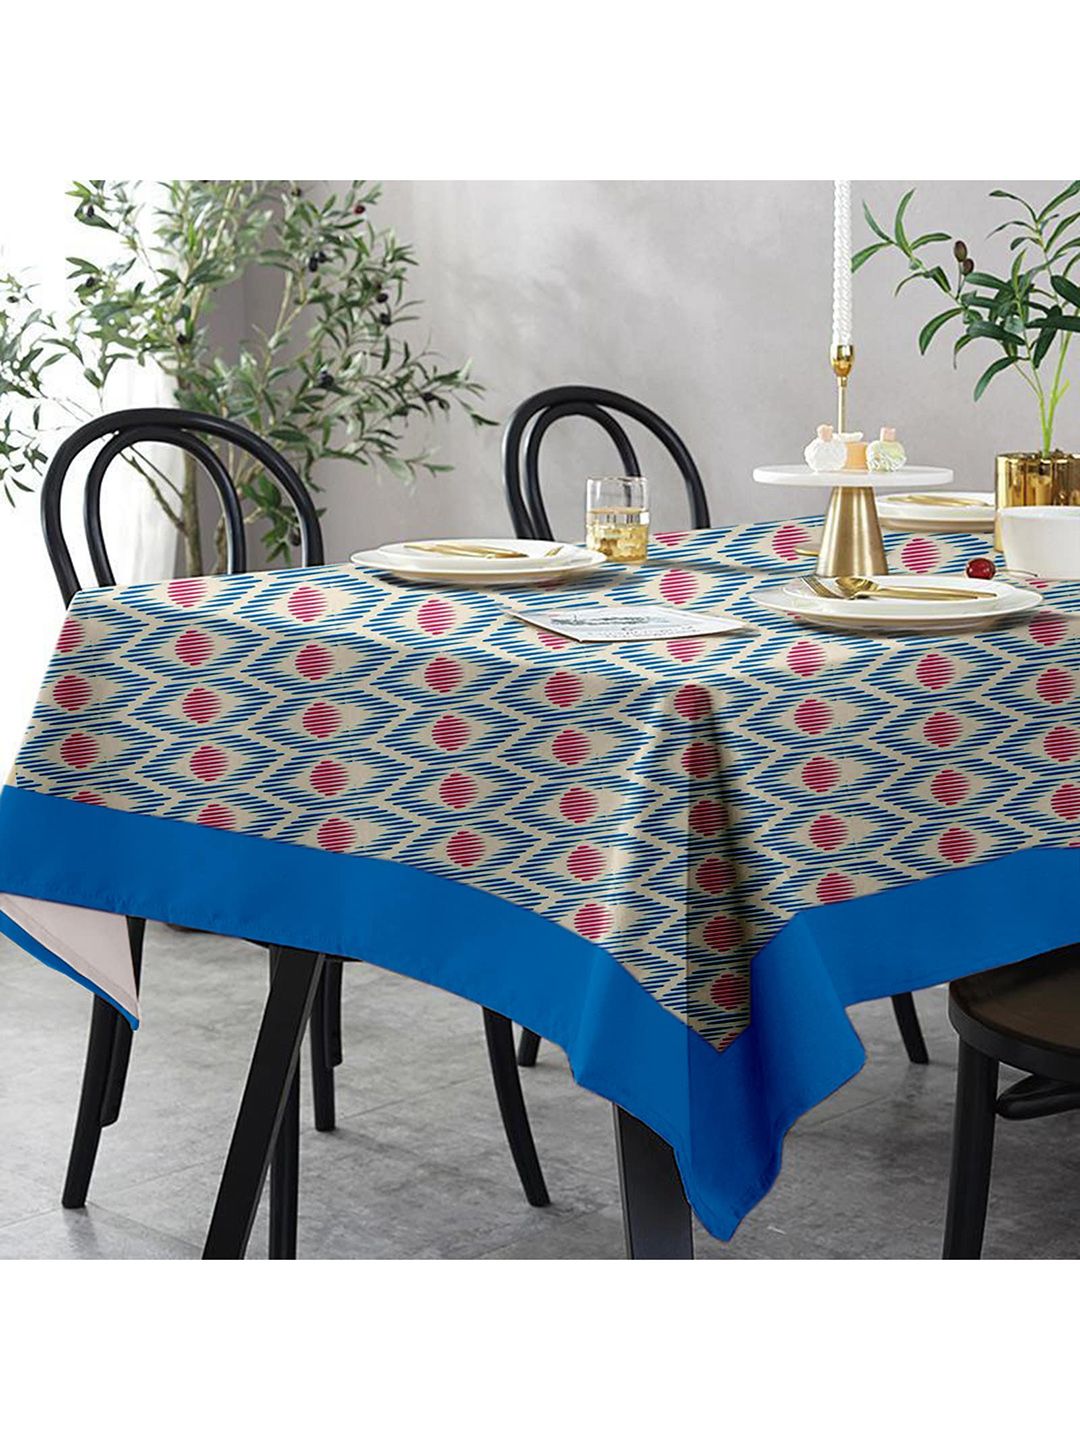 Lushomes 4 Seater Diamond Printed Table Cloth Price in India